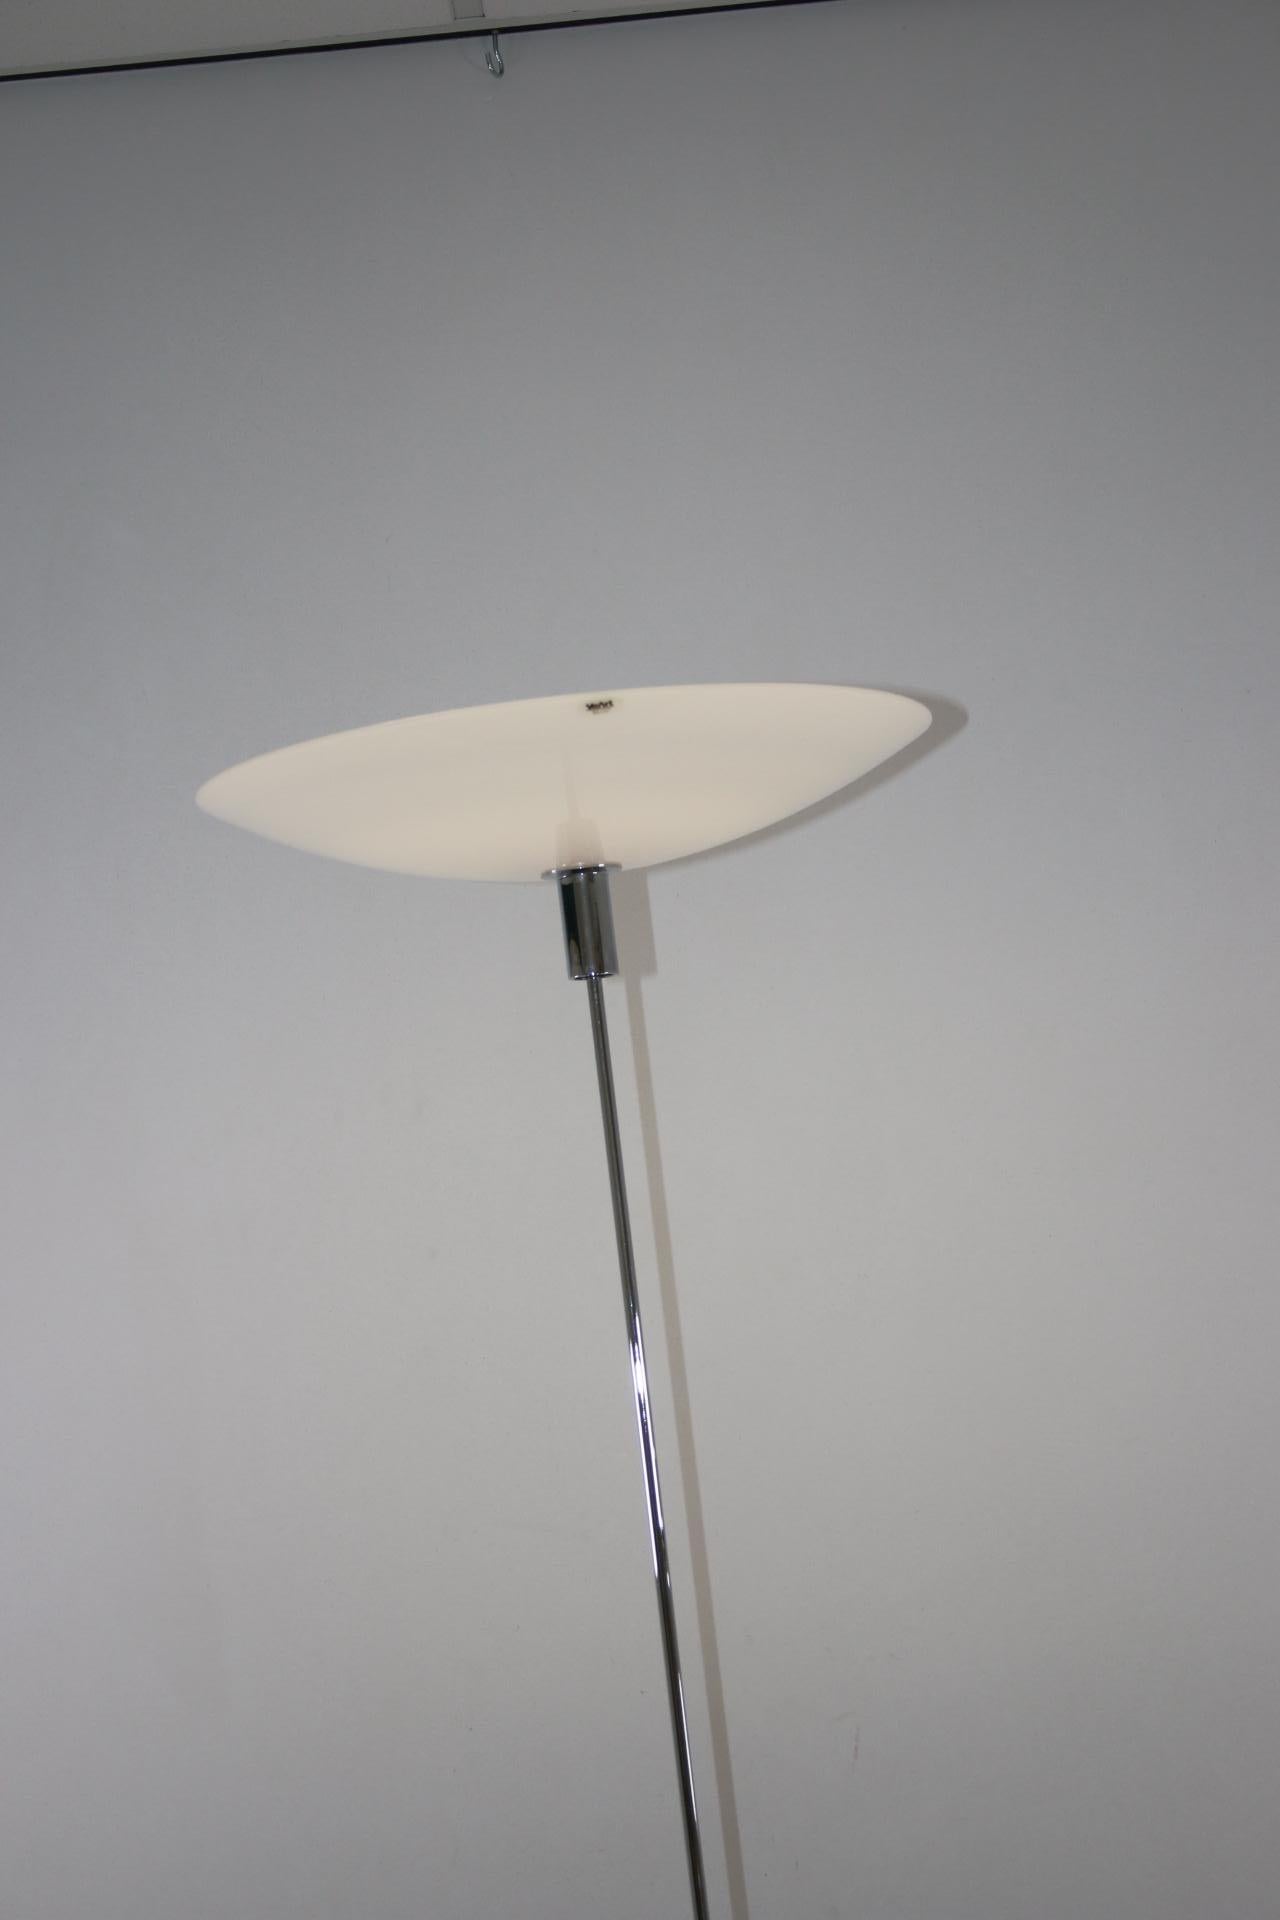 VeArt Italy Artemide Floor Lamp Design by Jeannot Cerutti For Sale 9